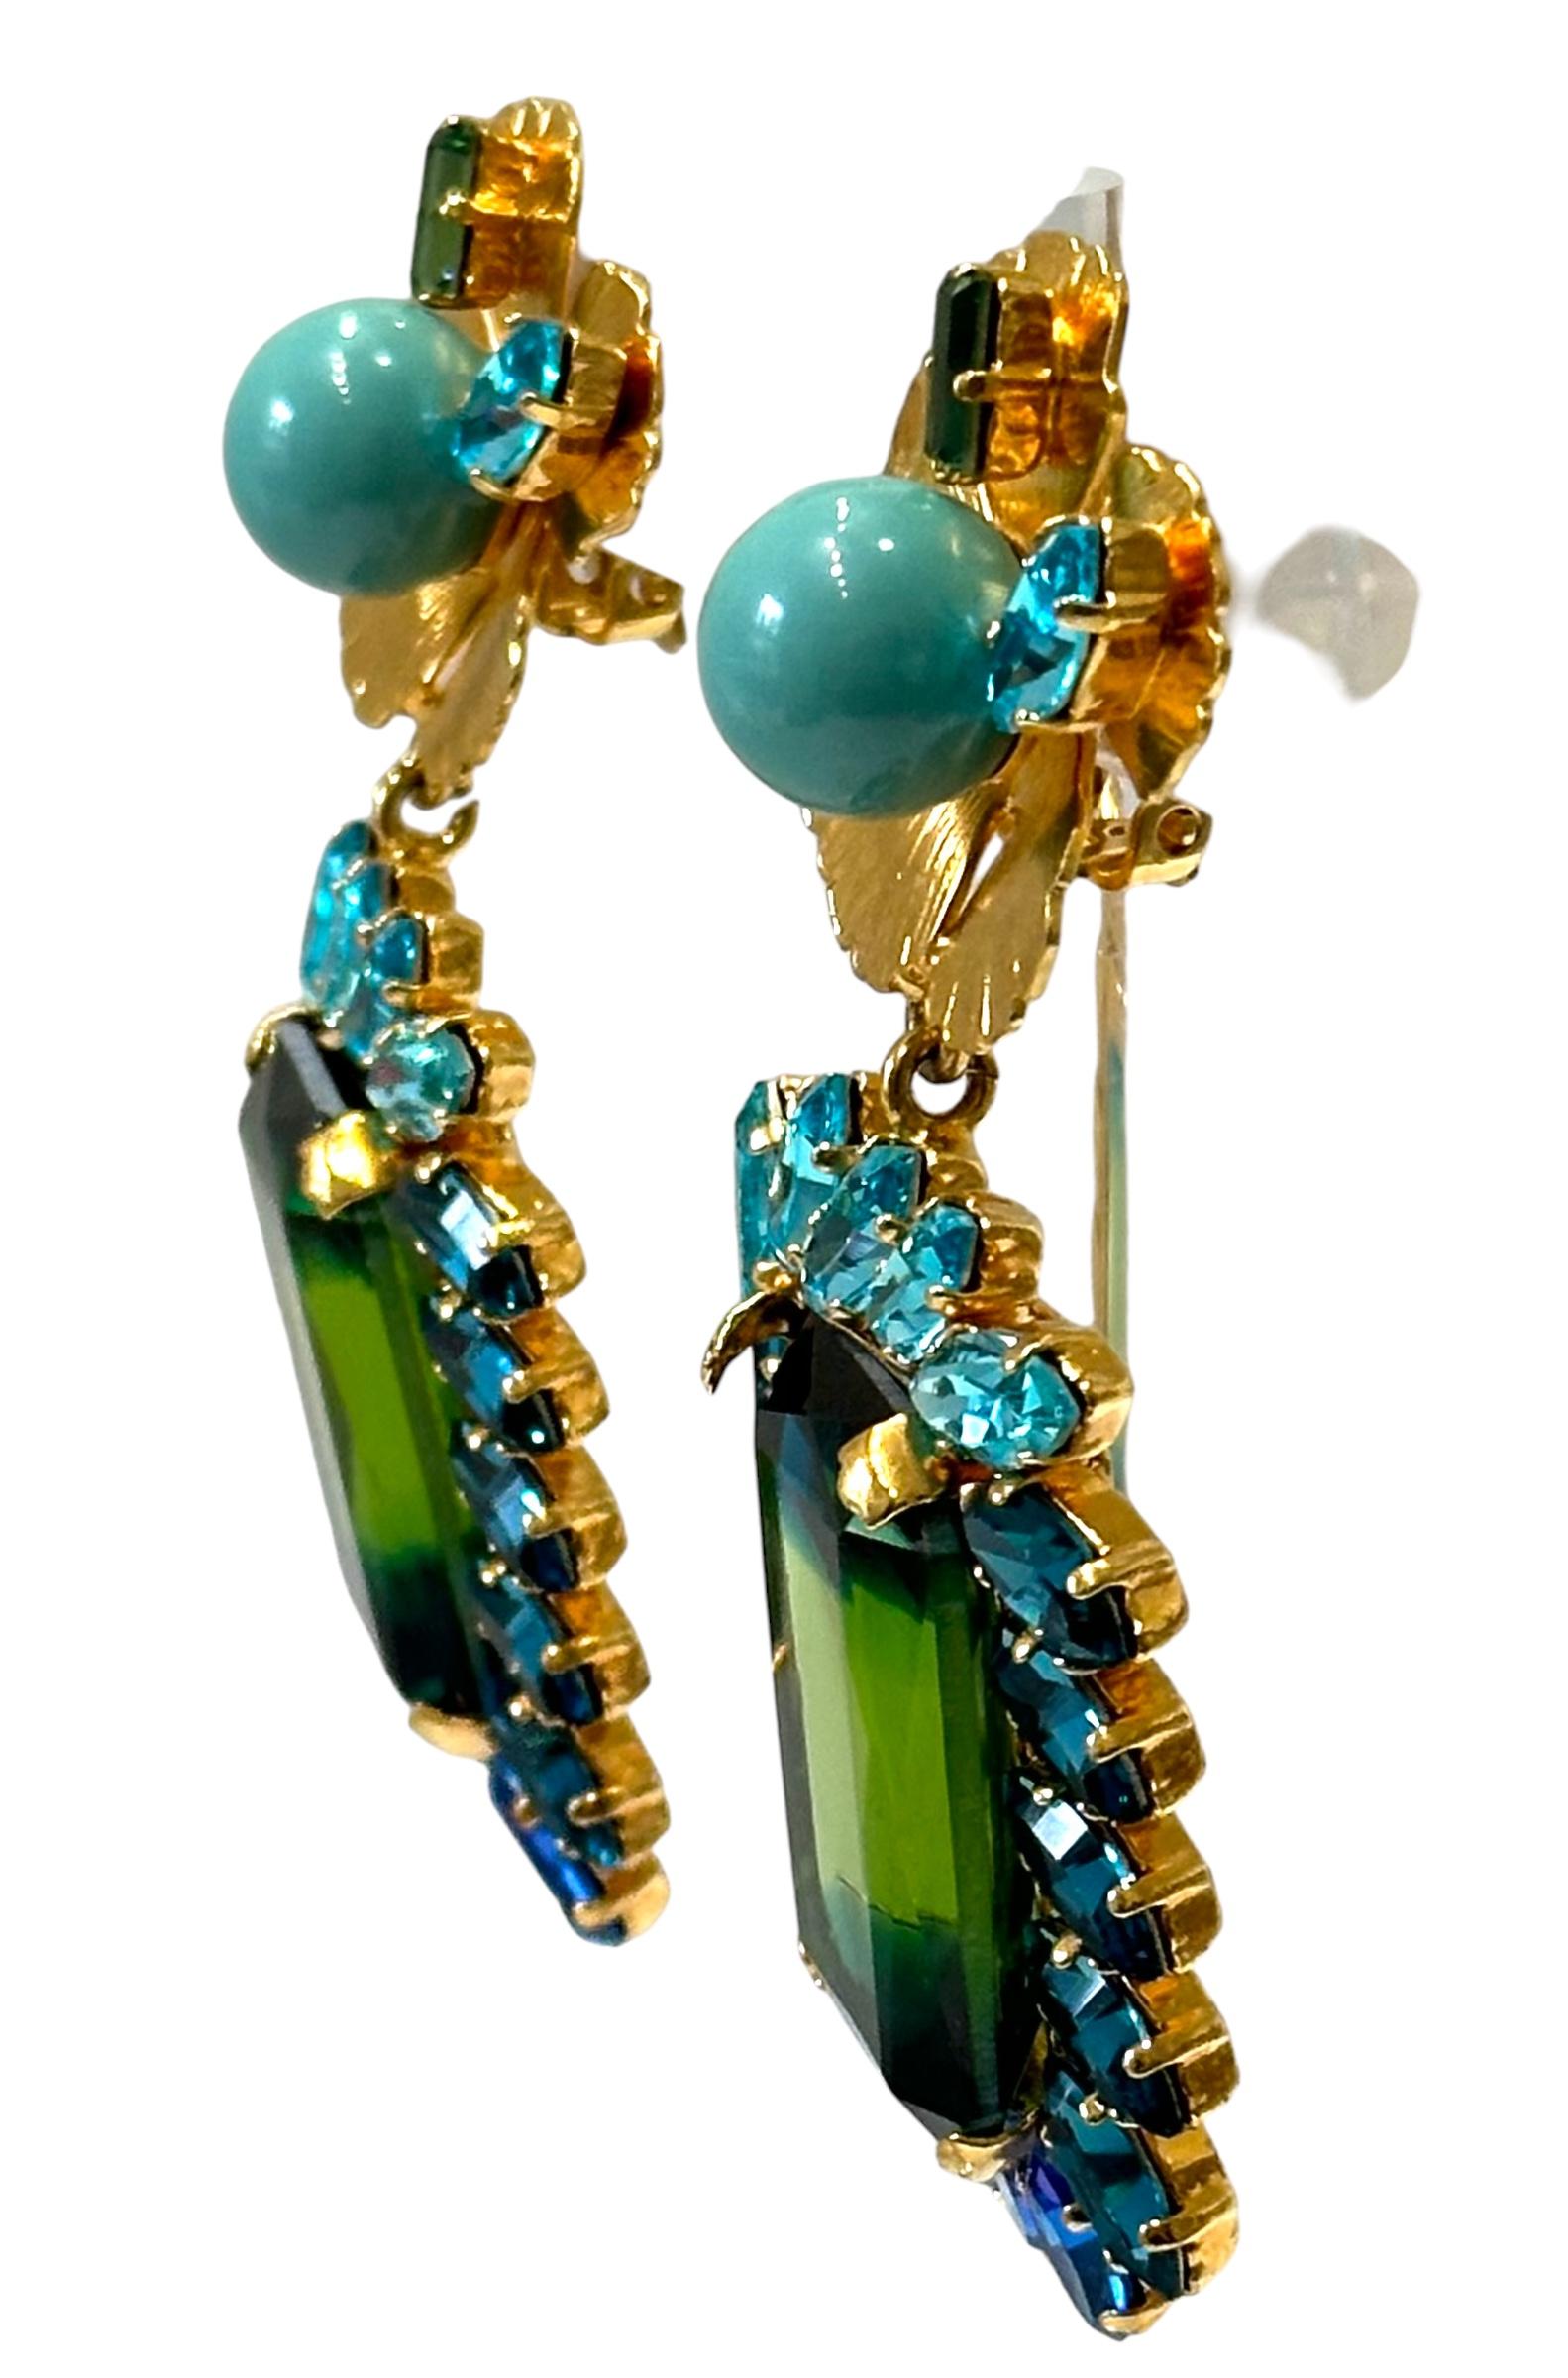 One of a kind made exclusively for Isabelle K Jewelry.
24carat gilded brass, Swarovski Crystal in exquisite colors . Turquoise glass pearl.
A show stopper!
Philippe Ferrandis was just chosen by the iconic French perfume company Guerlain for a